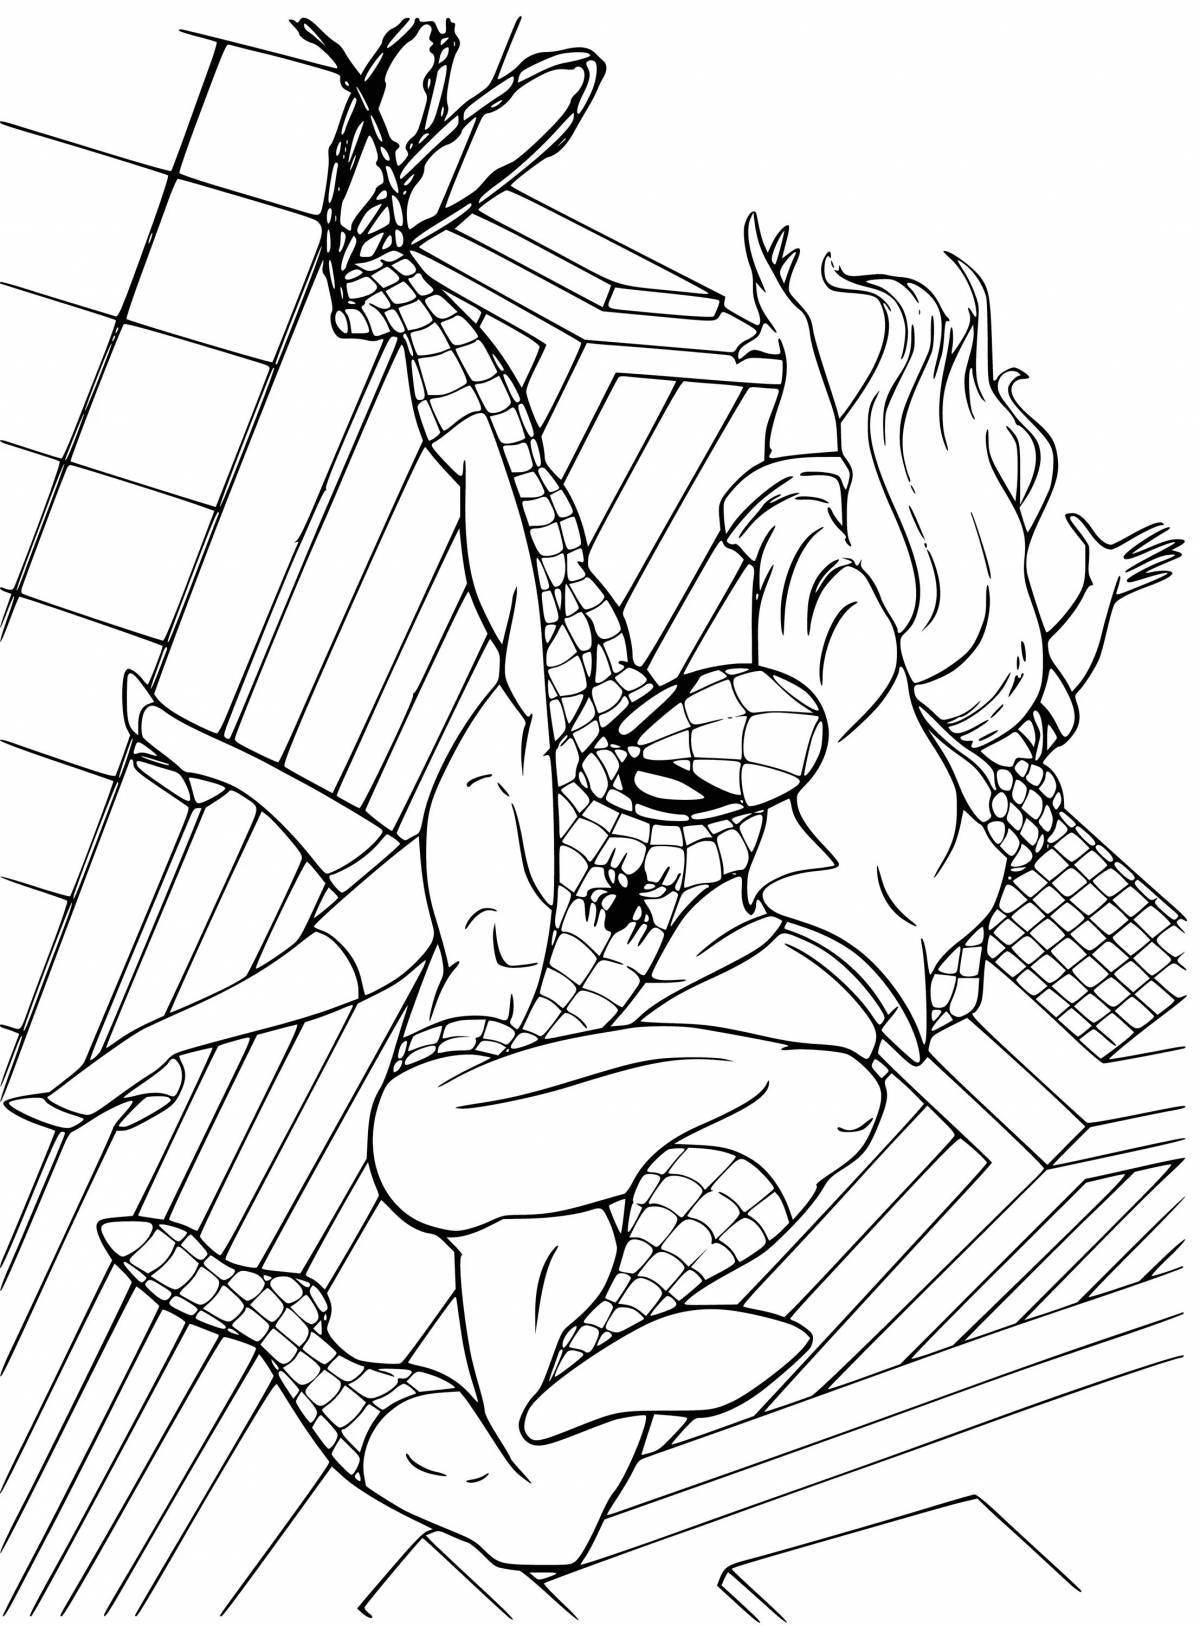 Coloring page playful spider-man